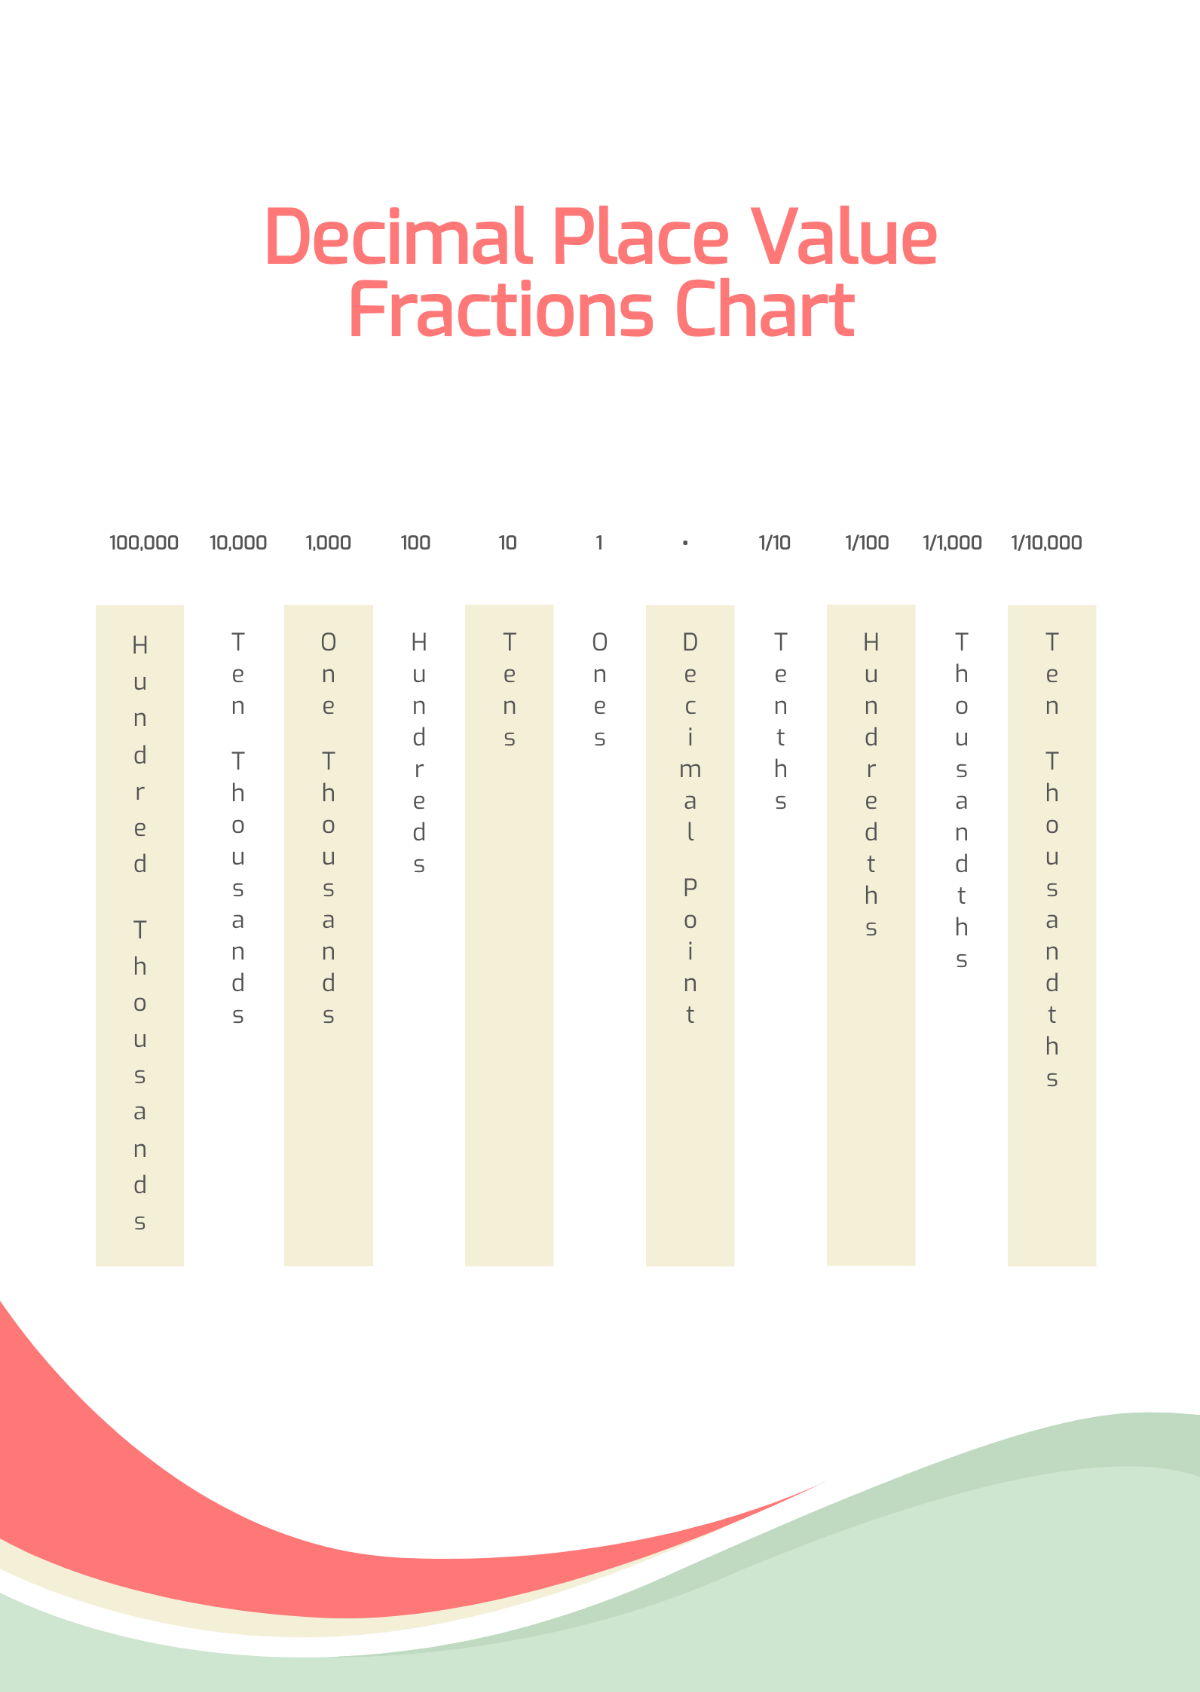 Decimal Place Value Fractions Chart Template